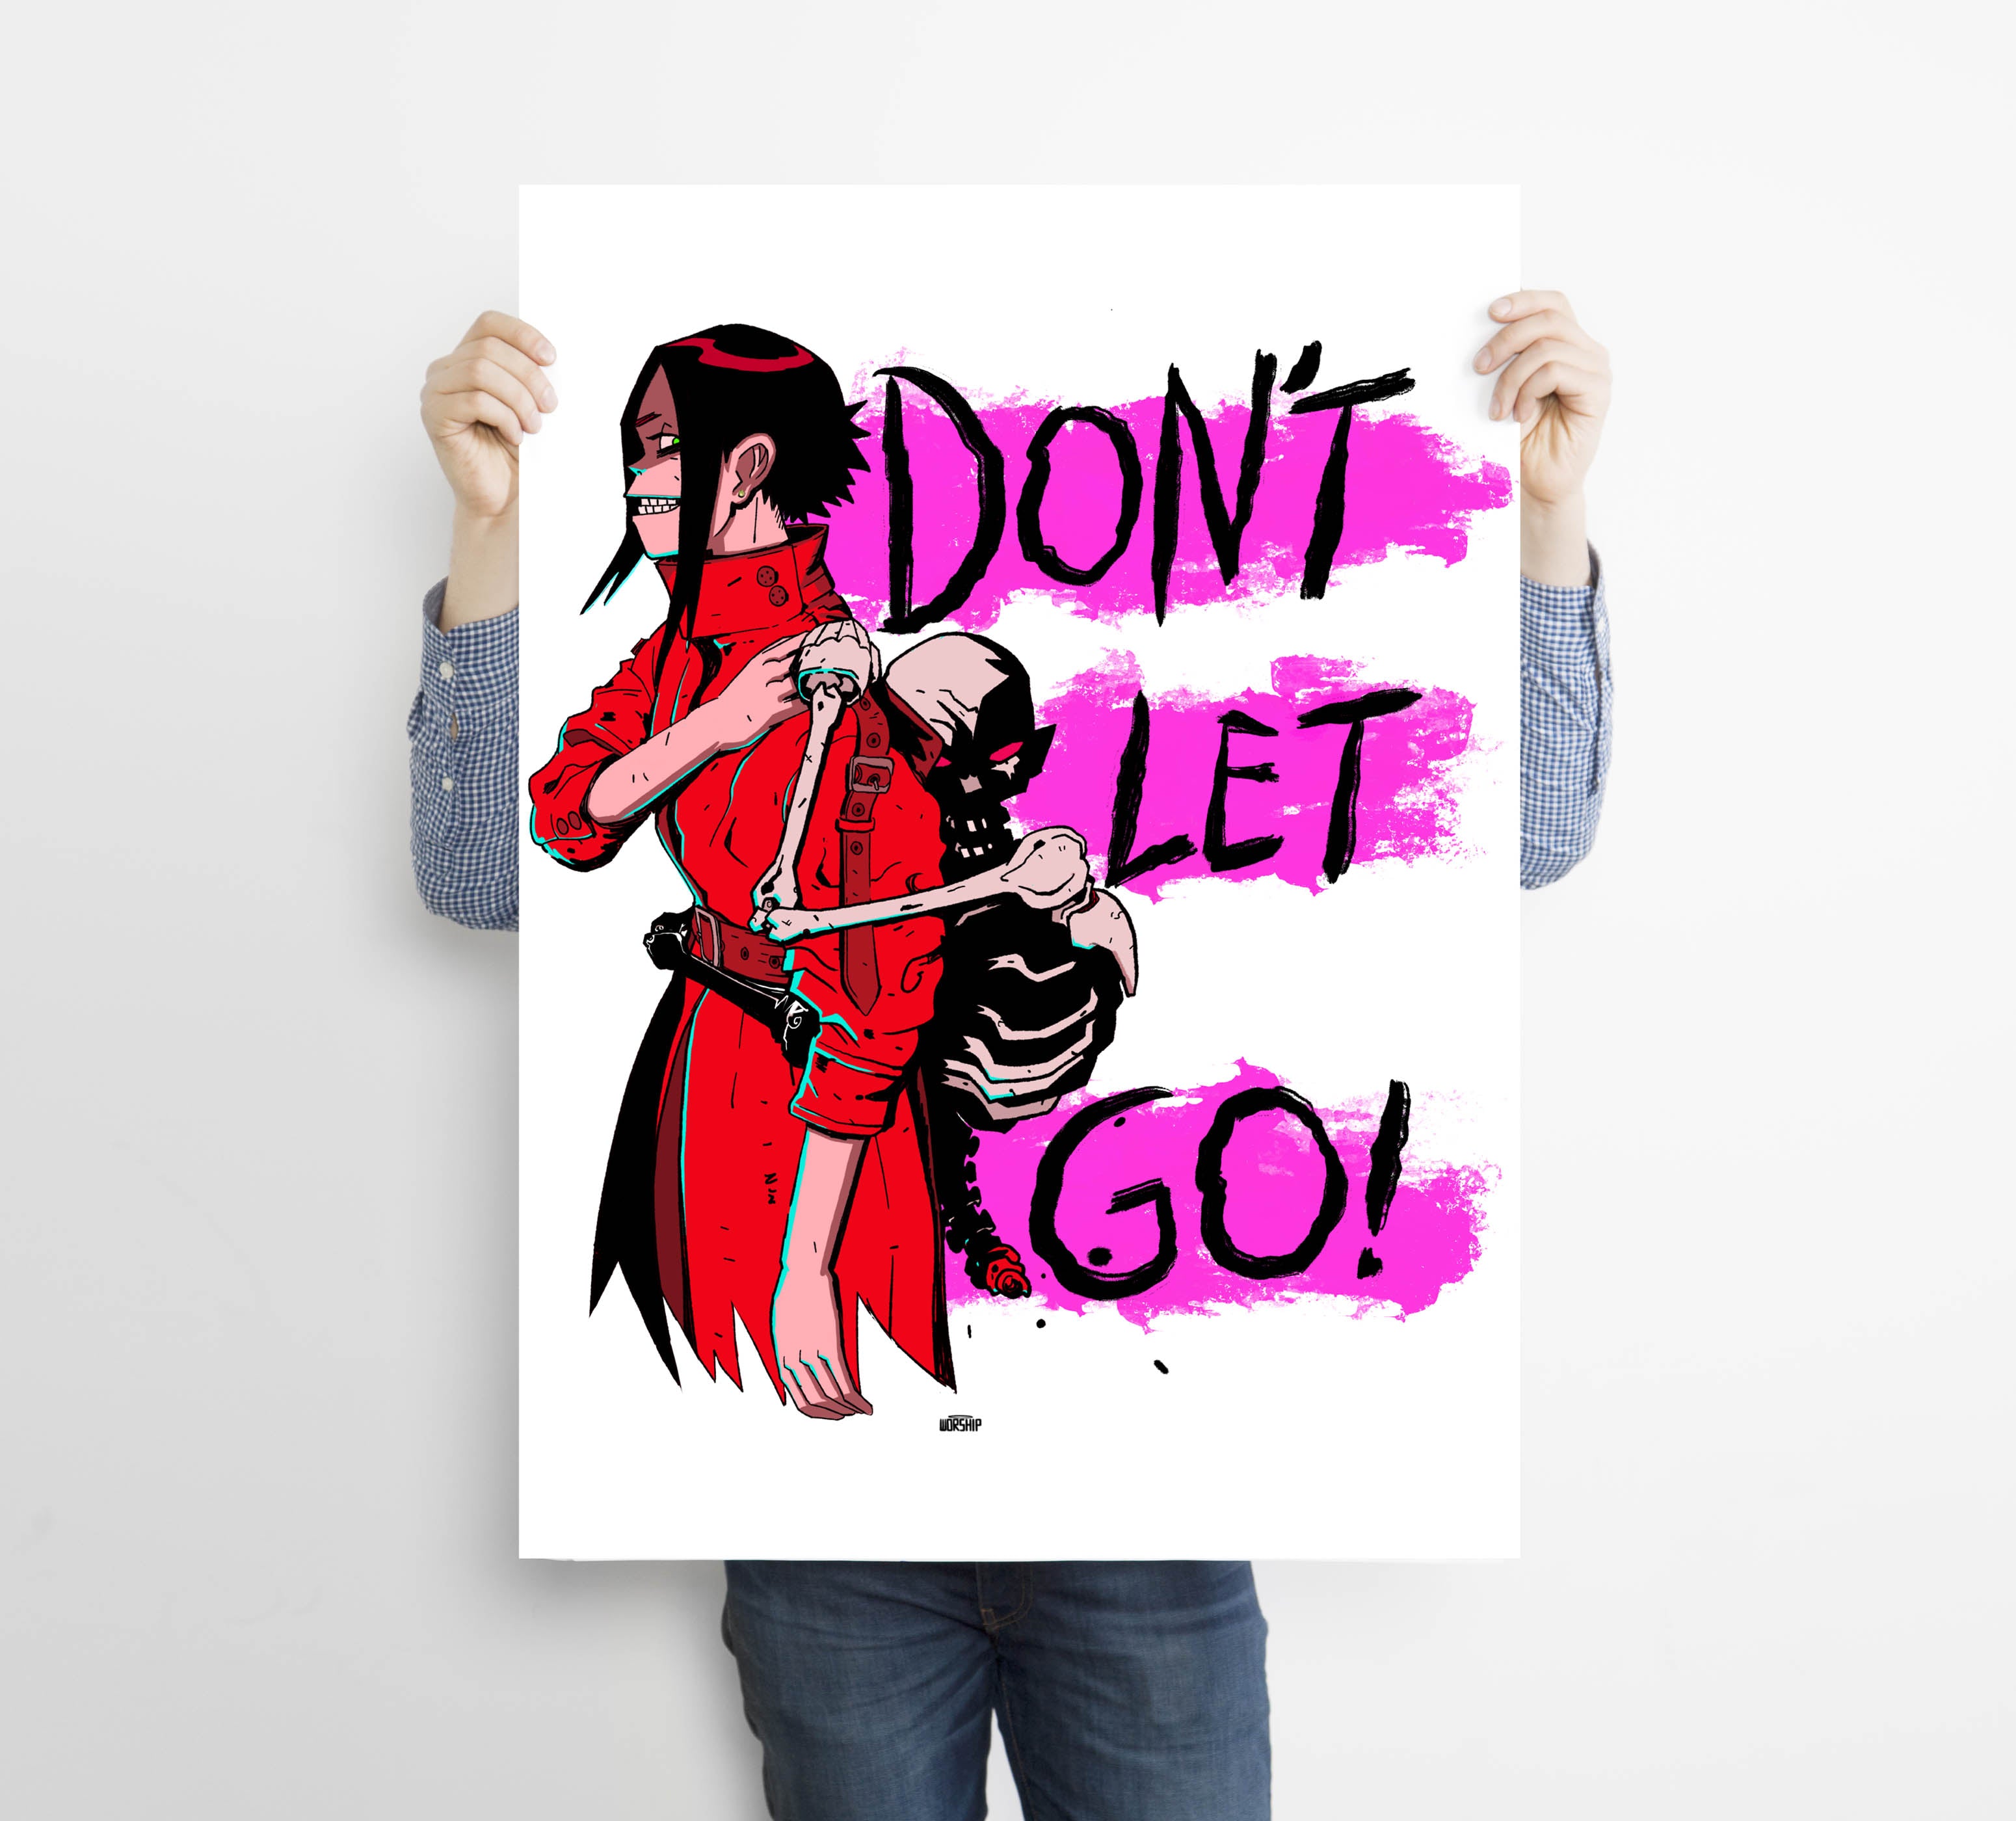 Unique and cool Gorillaz-style anime poster/wall art illustration